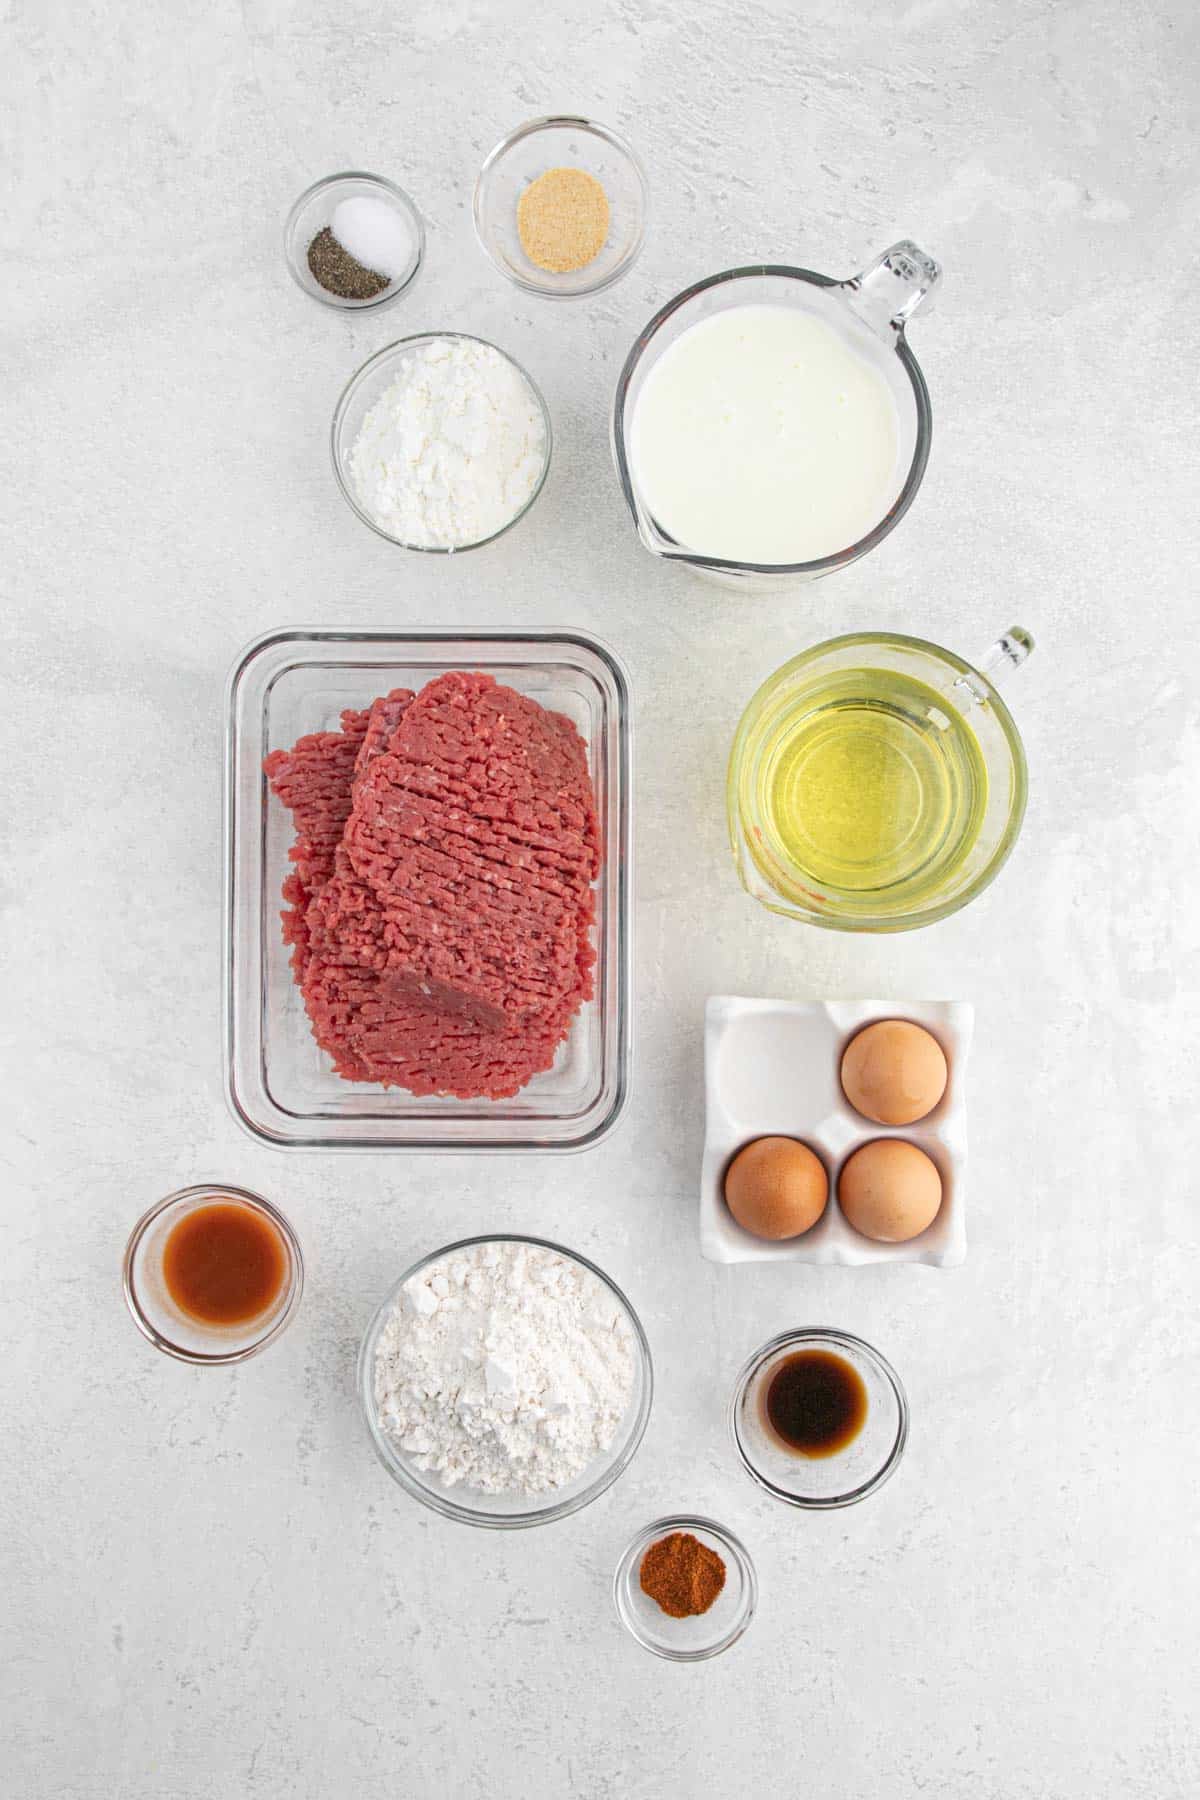 Ingredients to make a country fried steak in various bowls on a white background.